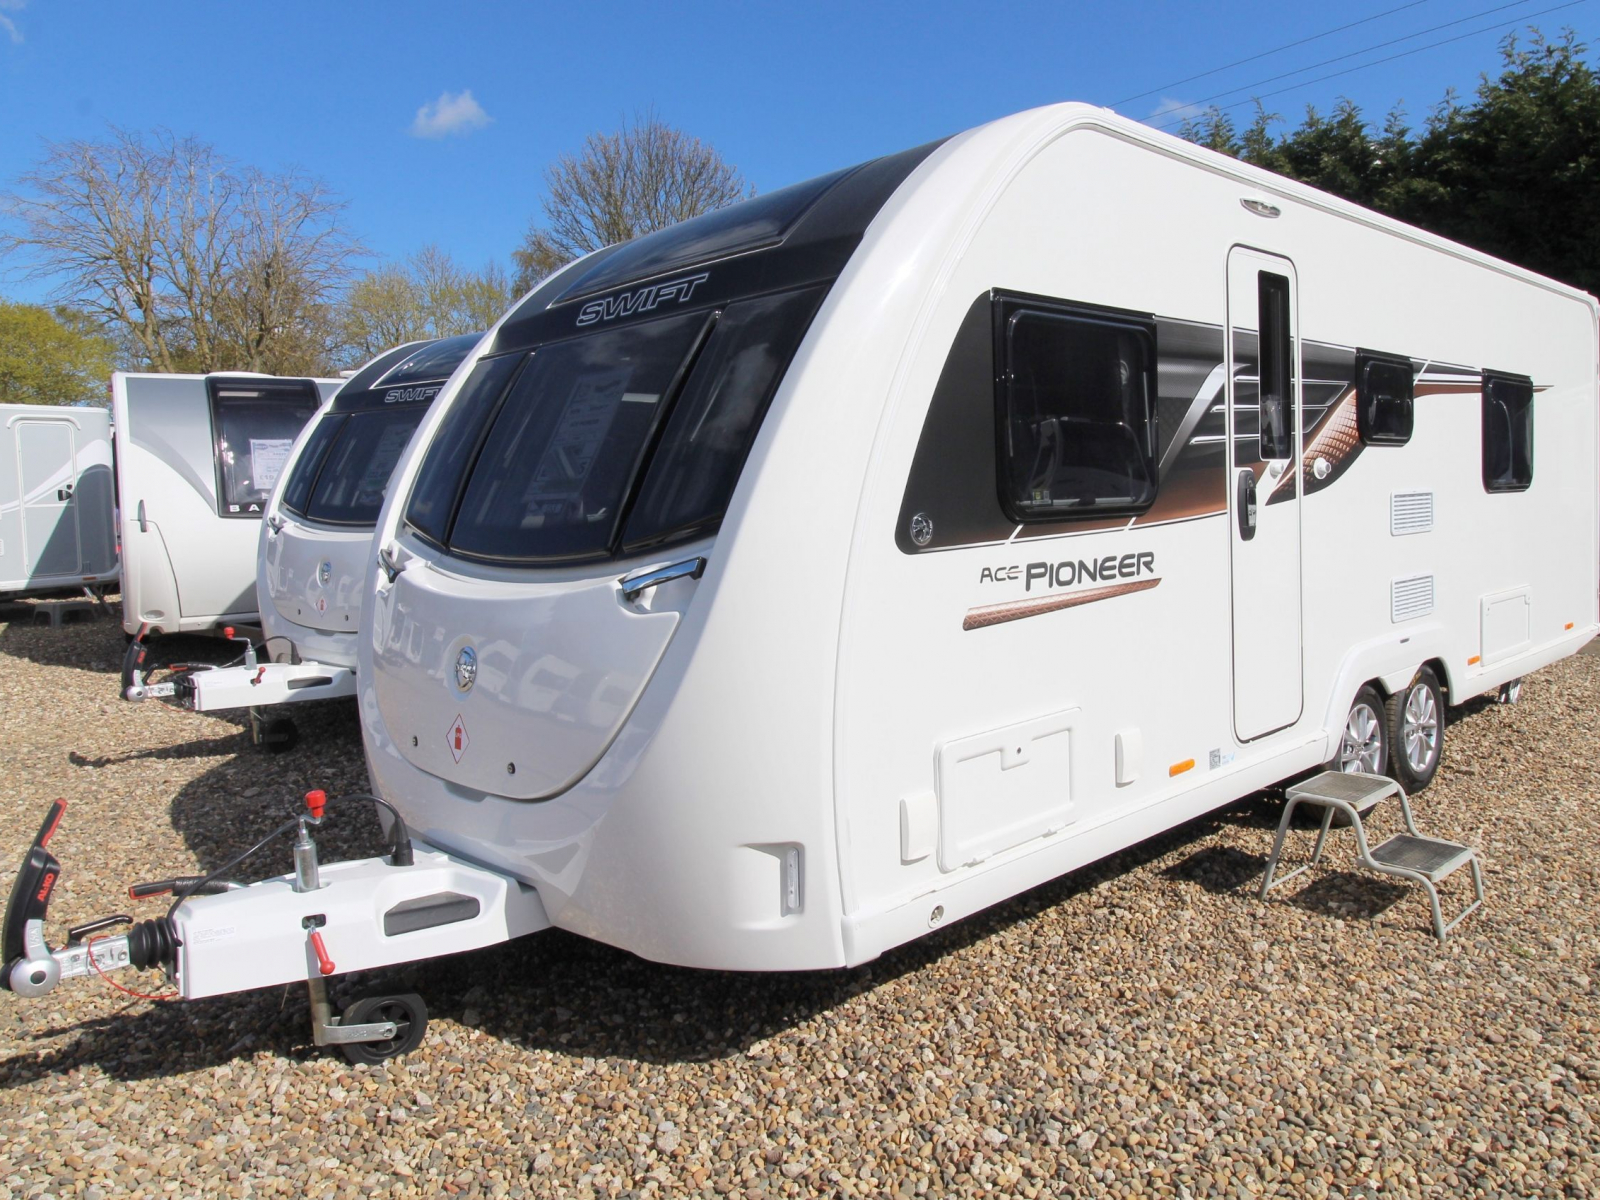 Swift Ace Pioneer 2022 - Wandahome Special Edition image